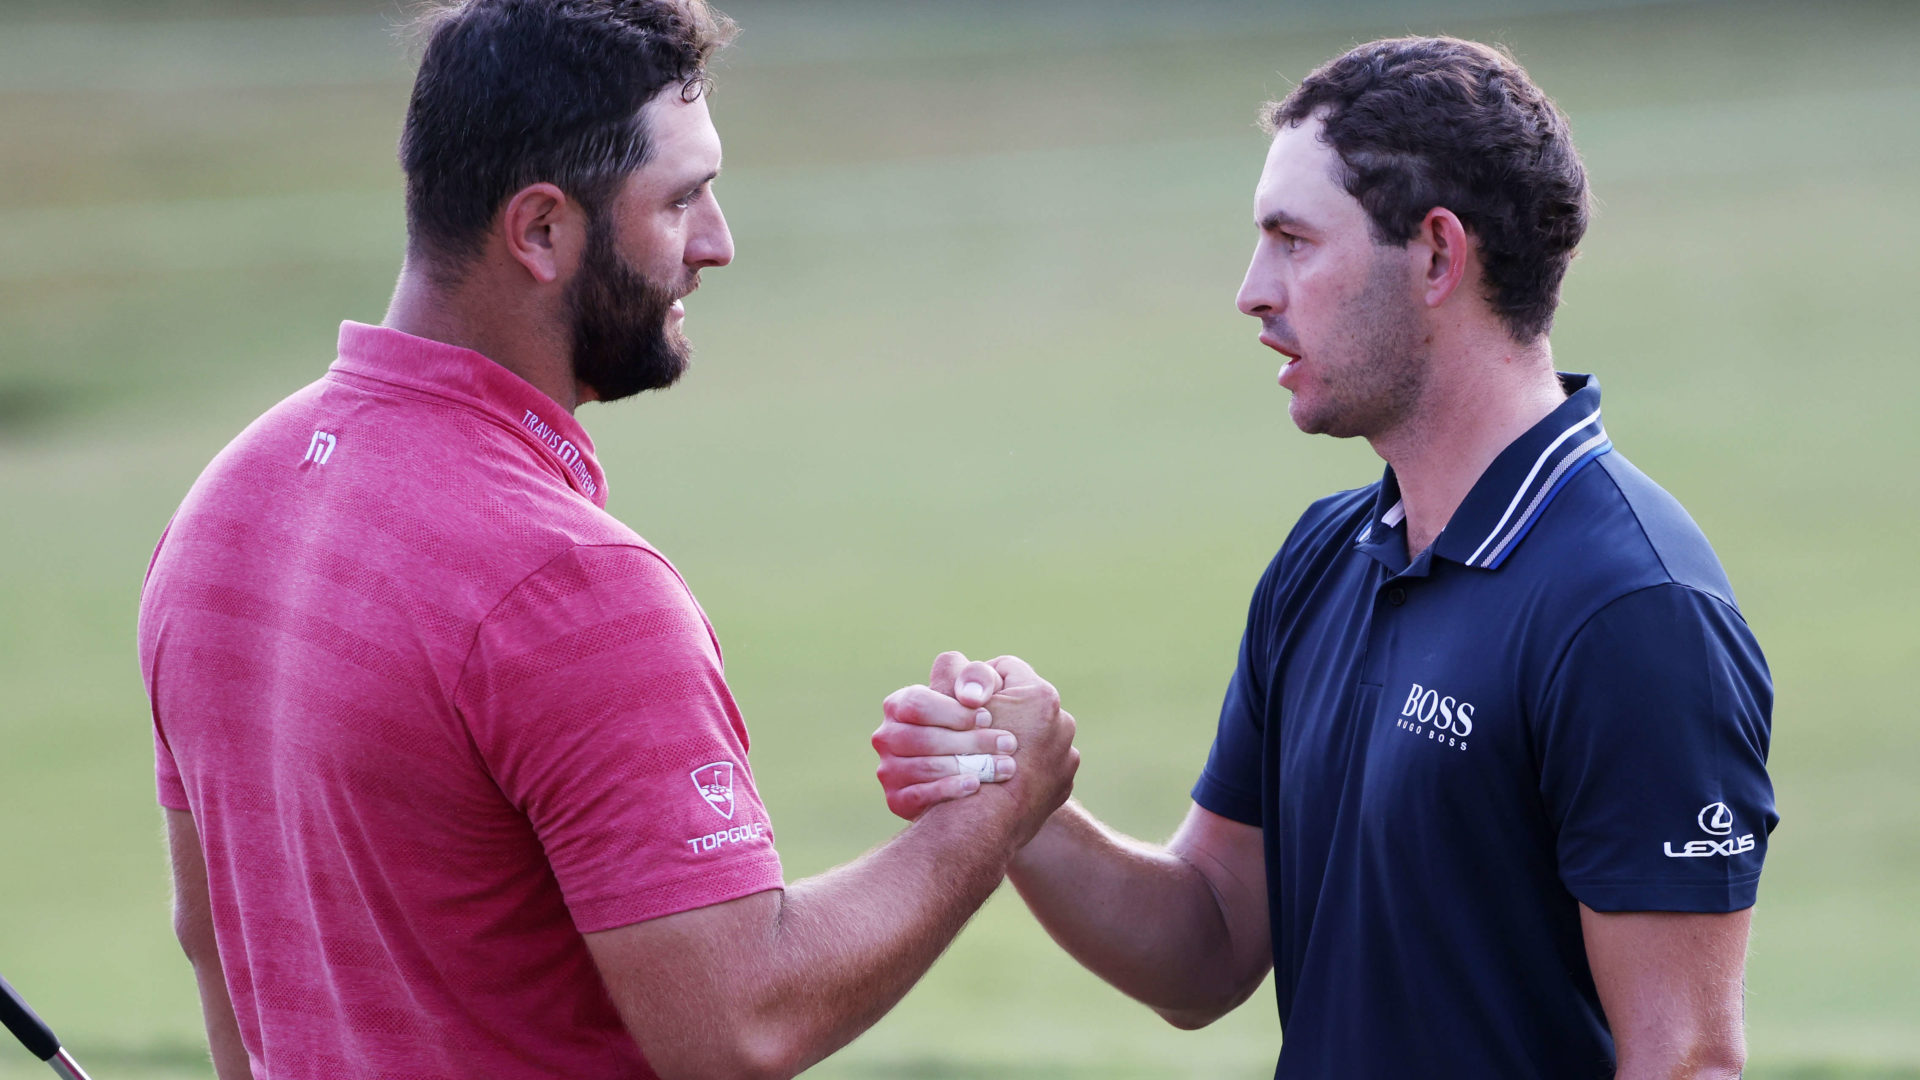 ATLANTA, GEORGIA - SEPTEMBER 05: Jon Rahm of Spain congratulates Patrick Cantlay of the United States on the 18th green after Cantlay won during the final round of the TOUR Championship at East Lake Golf Club on September 05, tour news, 2021 in Atlanta, Georgia. (Photo by Kevin C. Cox/Getty Images)